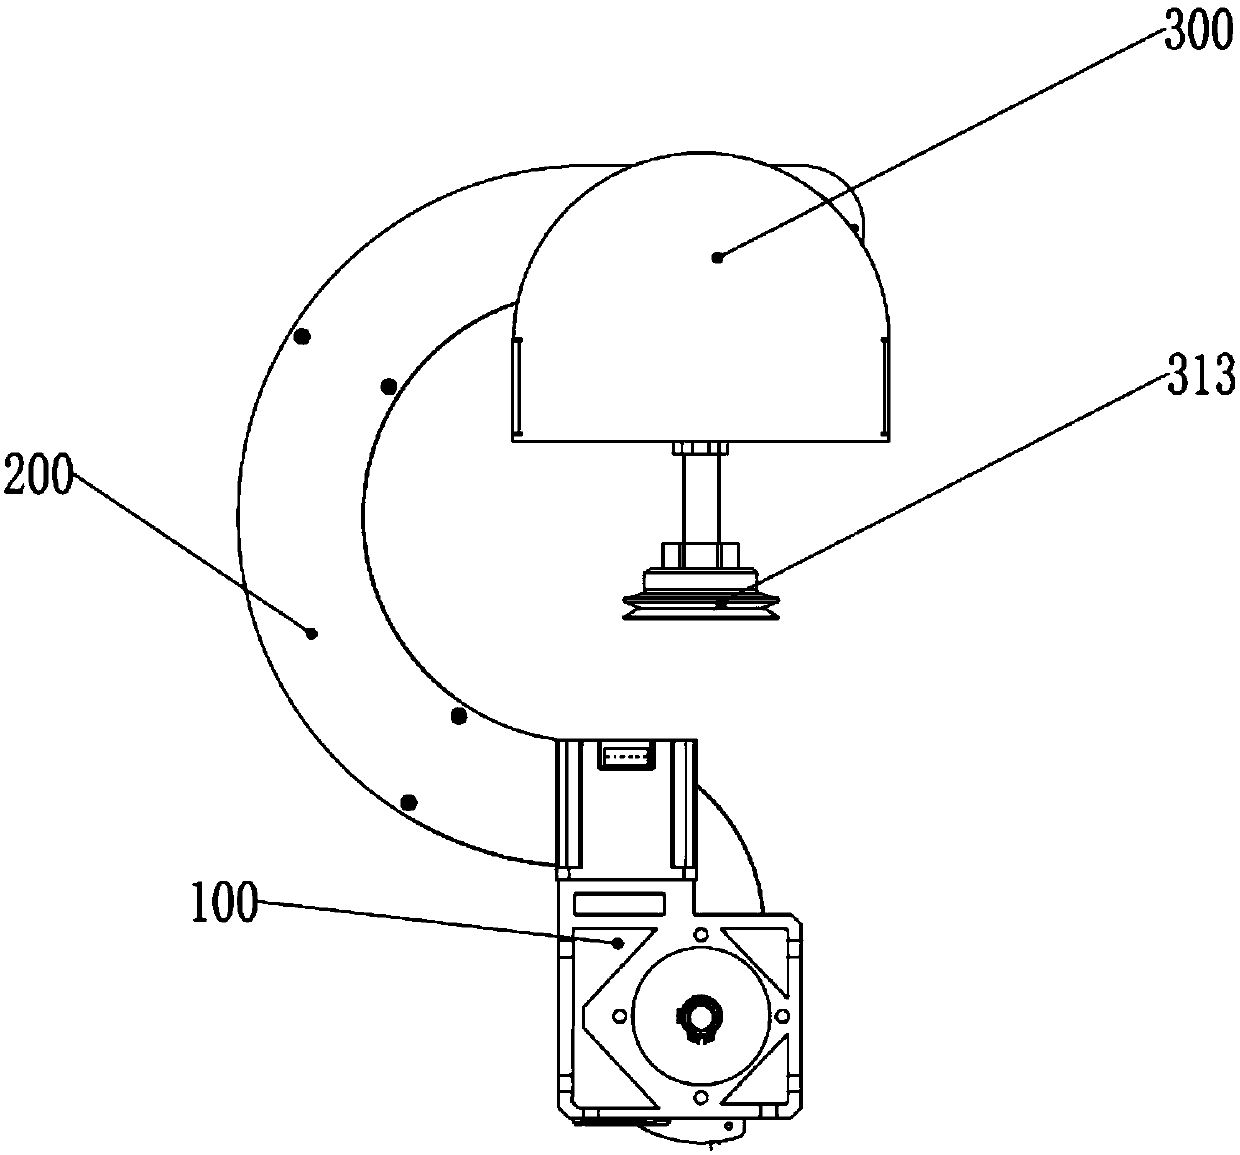 Sucker bowl taking device with laser detection control